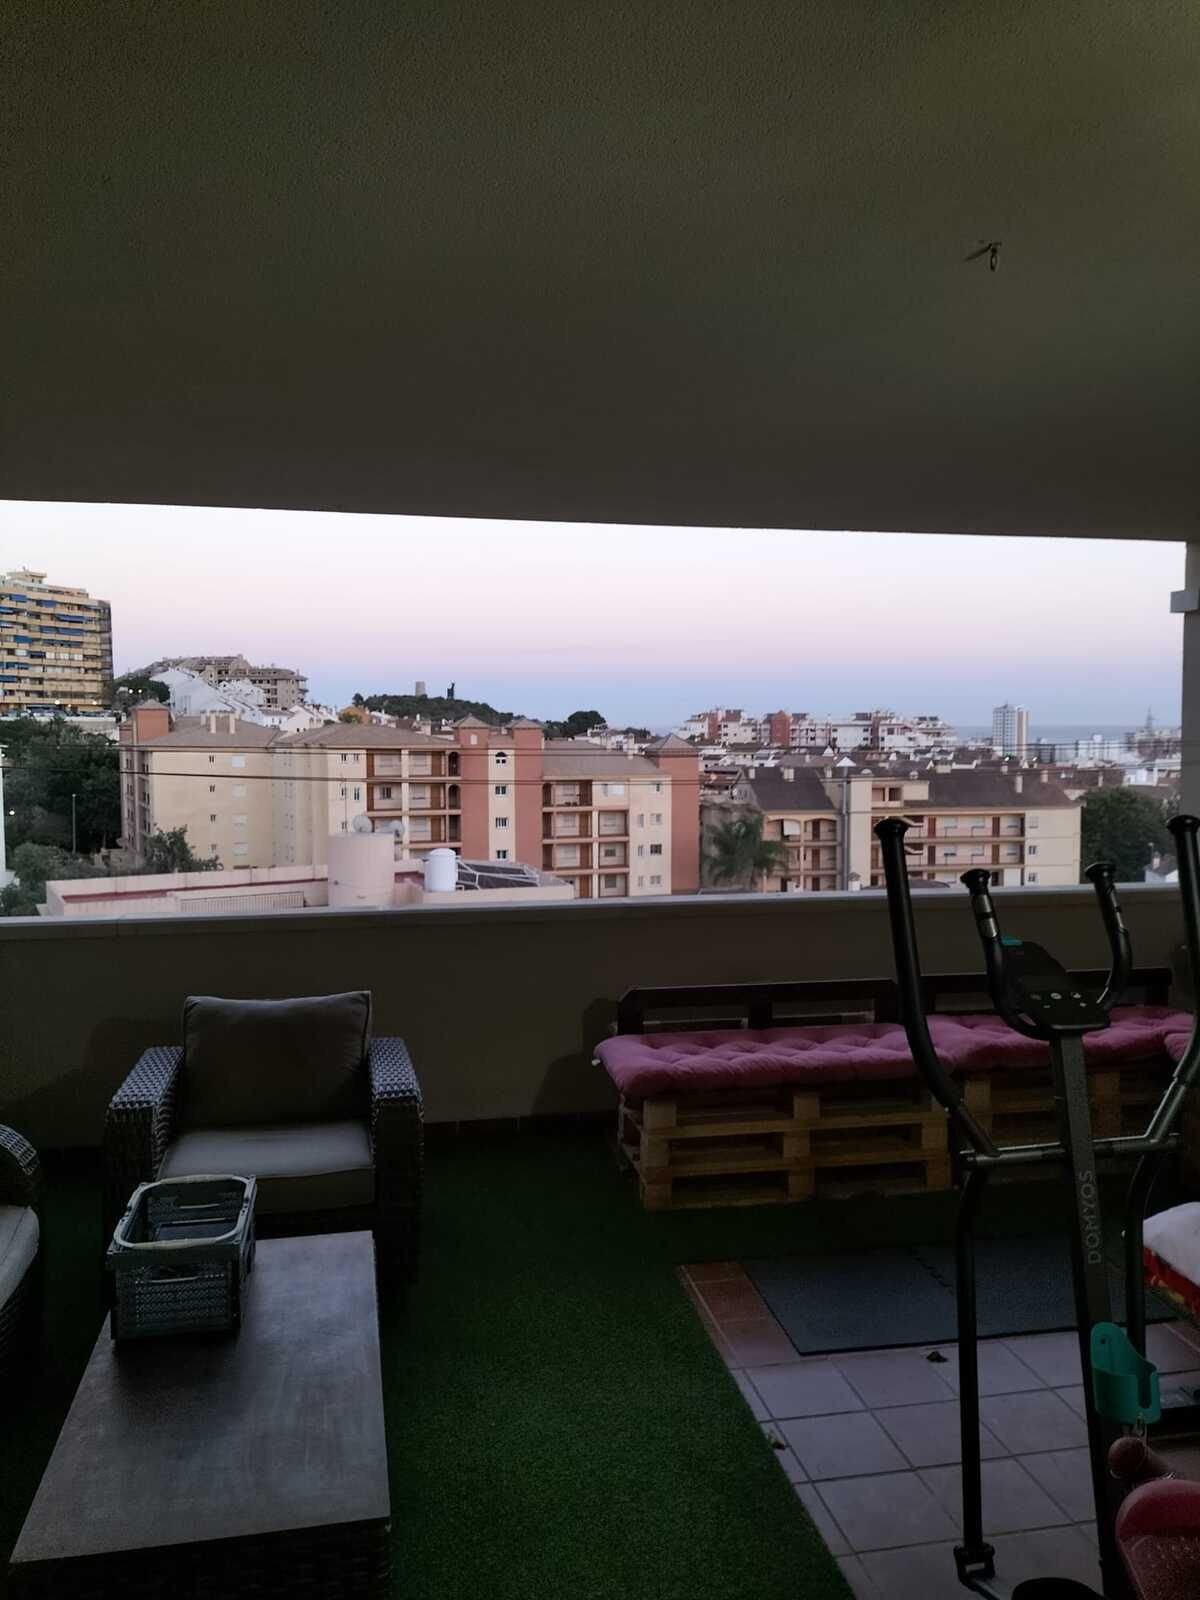 						Apartment  Middle Floor
													for sale 
																			 in Los Pacos
					